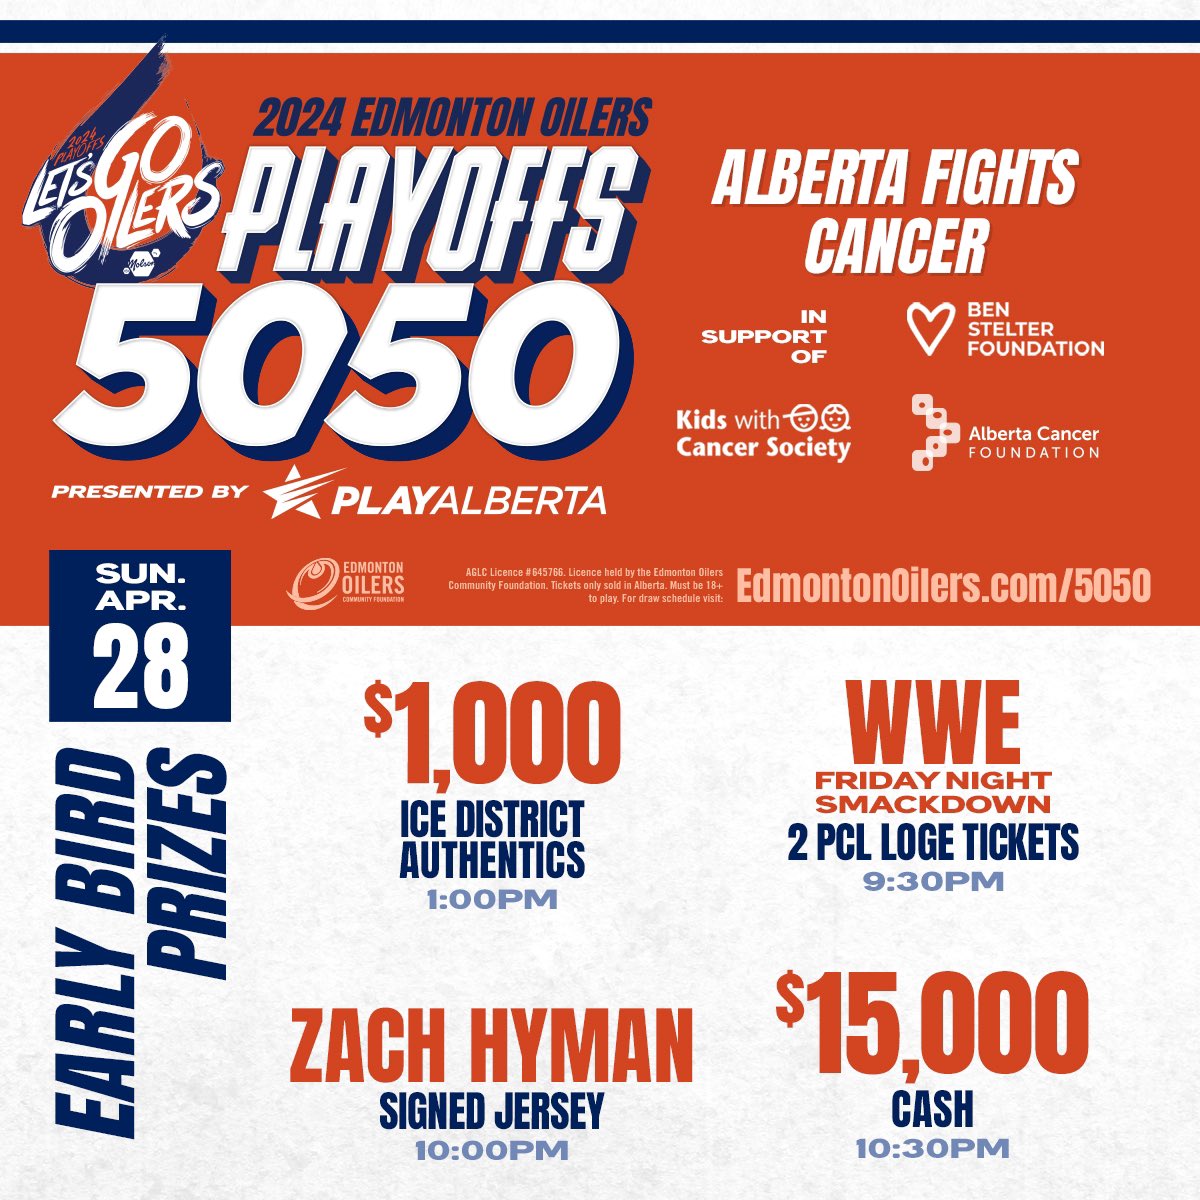 Did you get your 50/50 tickets yet? The jackpot is approaching $1M and there are some awesome early bird prizes today! You can get your tickets at nhl.com/oilers/communi… @Oil_Foundation @EdmontonOilers #yeg #alberta #edmonton #oilers